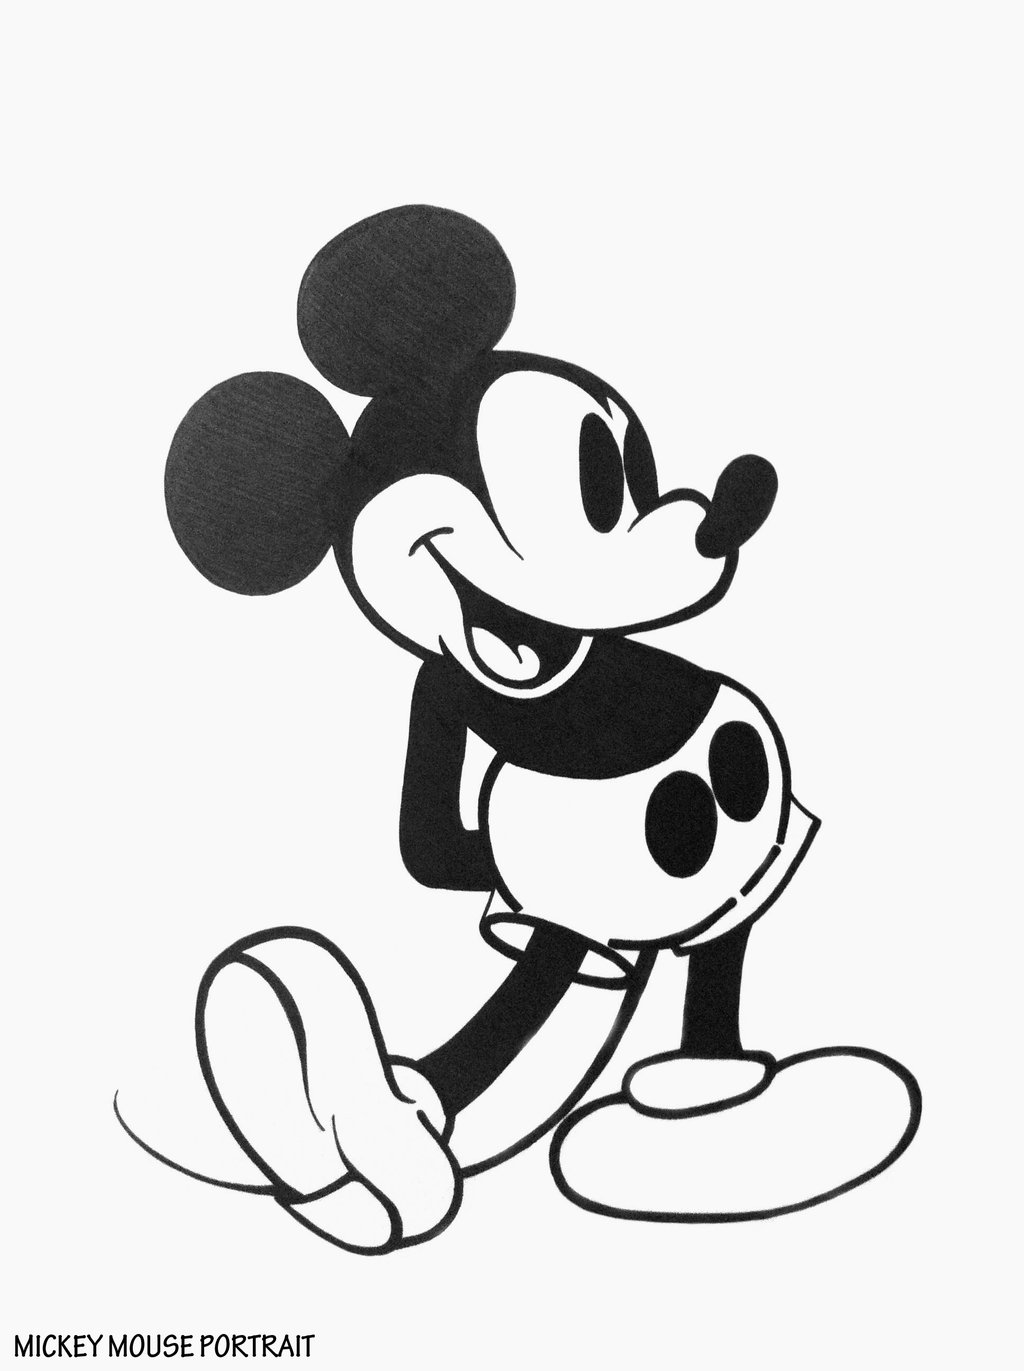 How To Draw Mickey, Step by Step, Drawing Guide, by Dawn - DragoArt